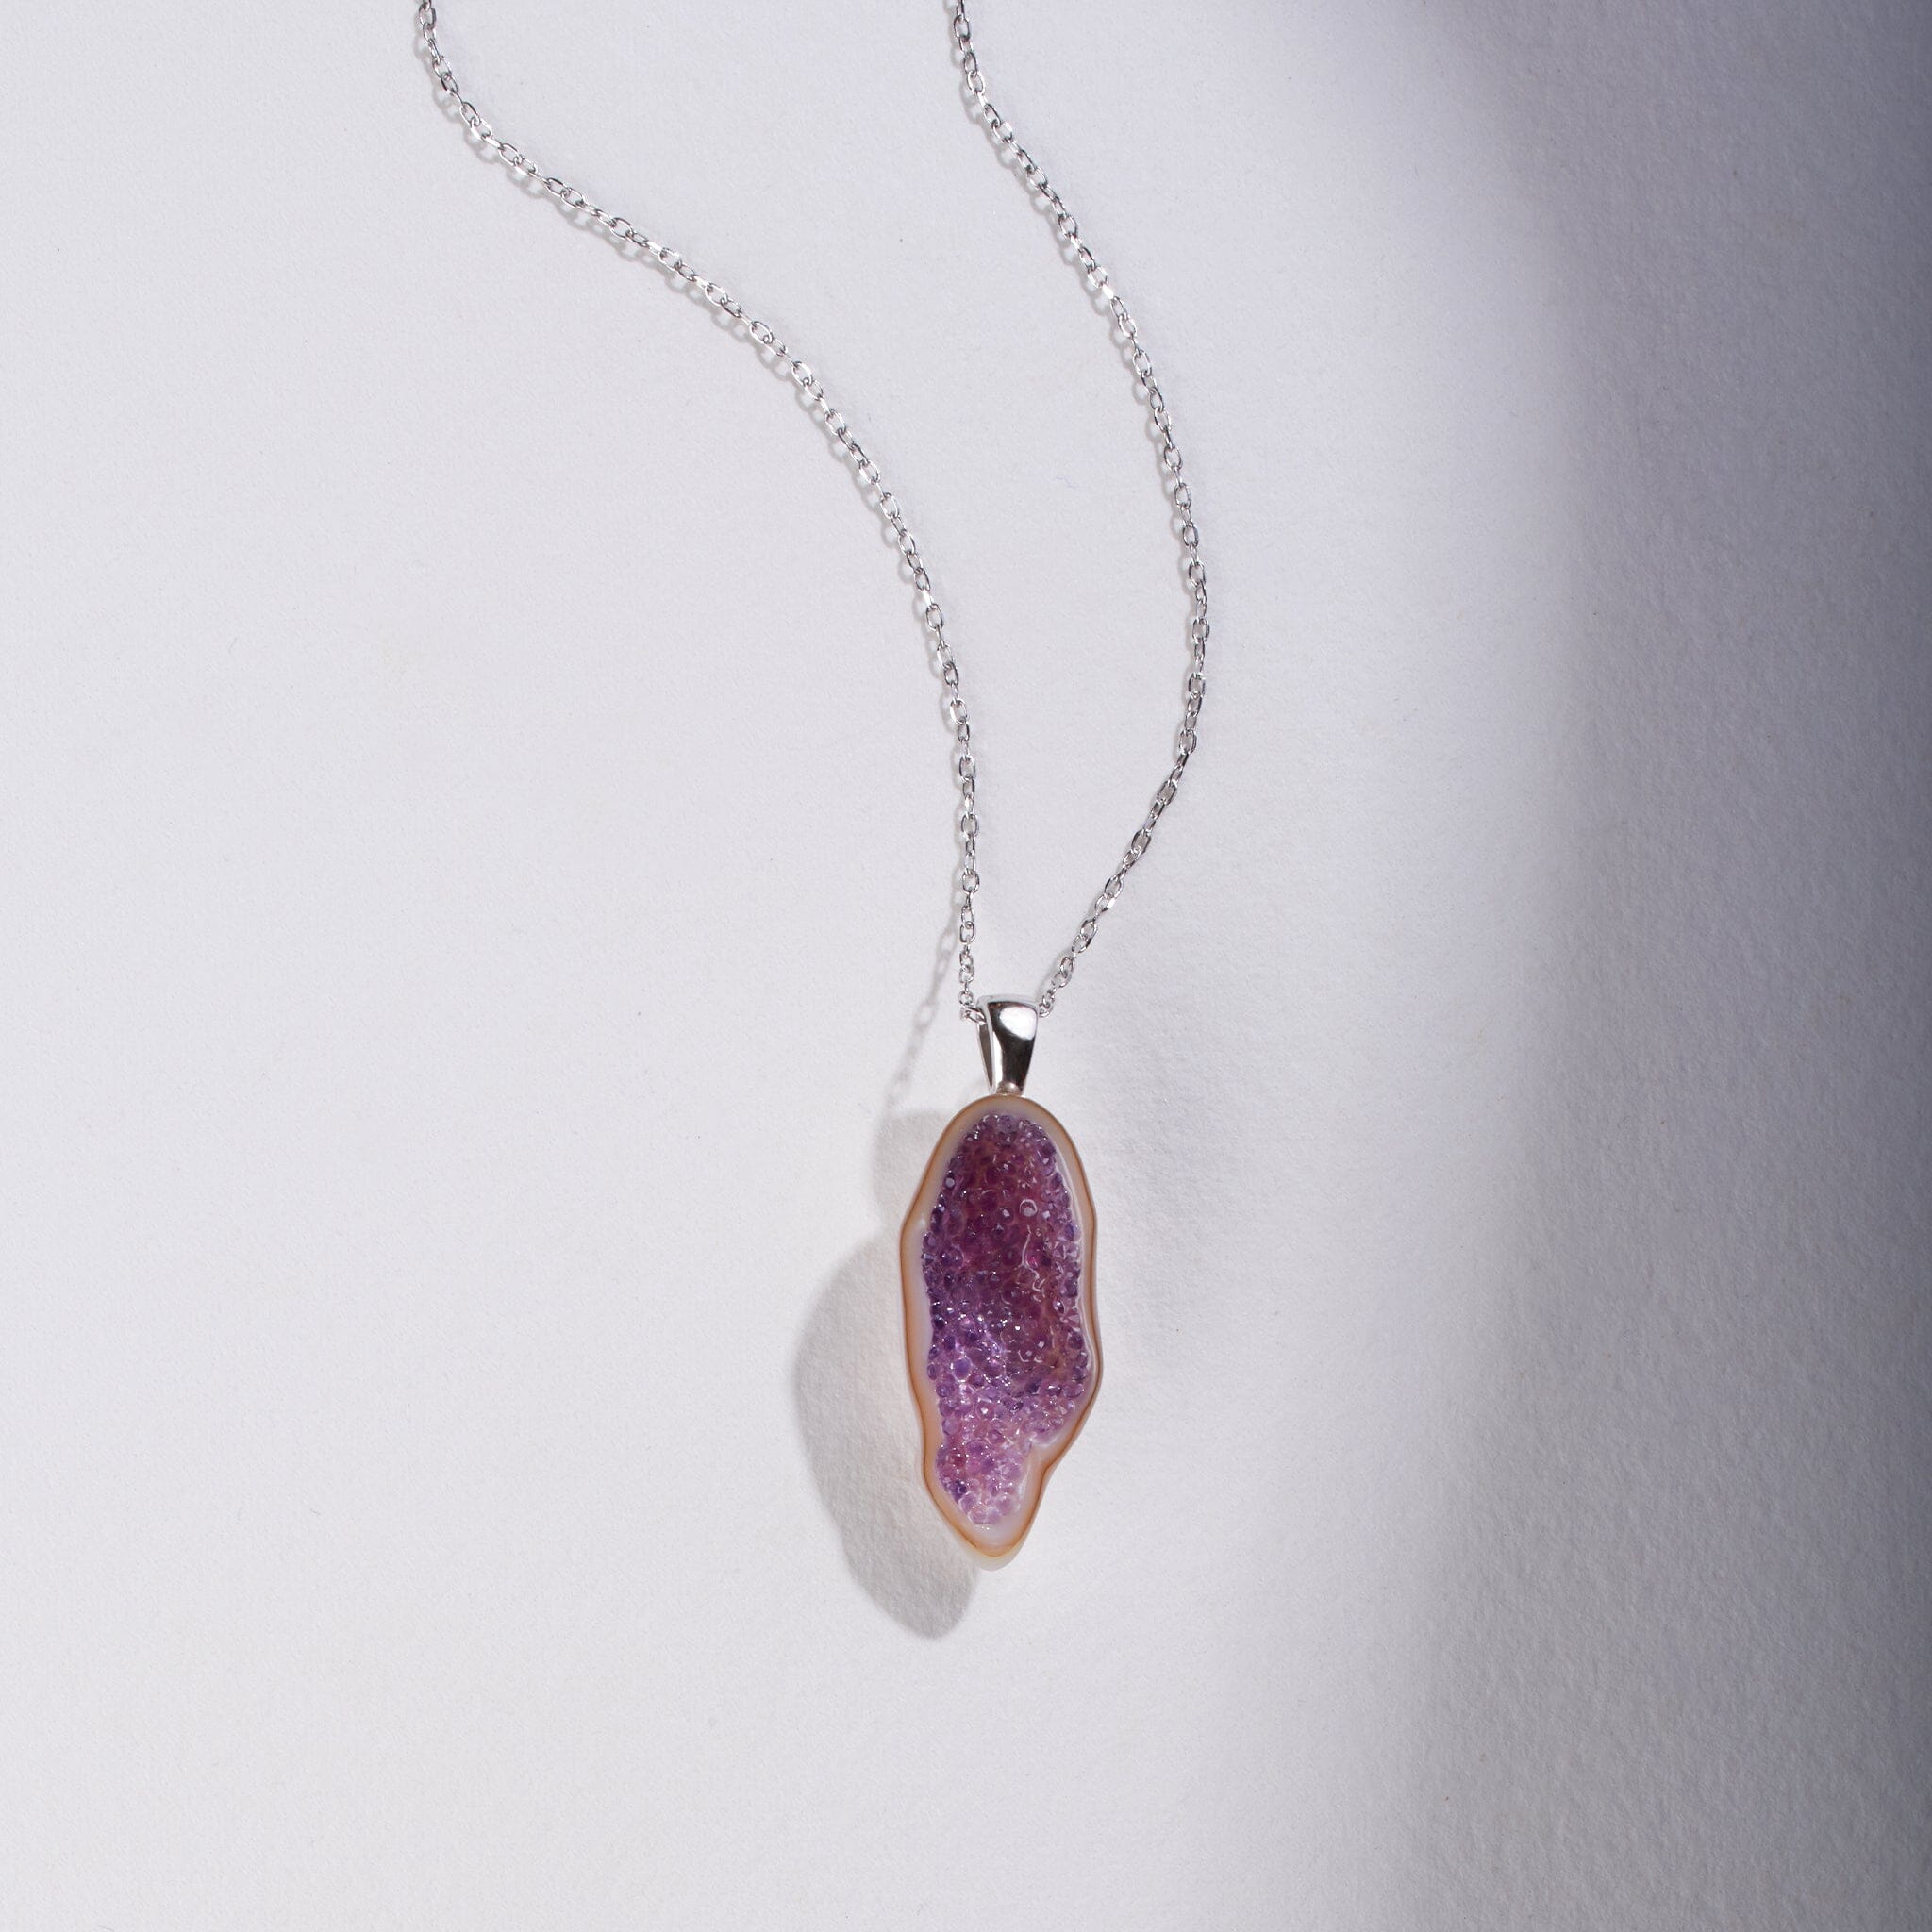 Freshwater Souffle Pearl Geode Pendant with Amethyst